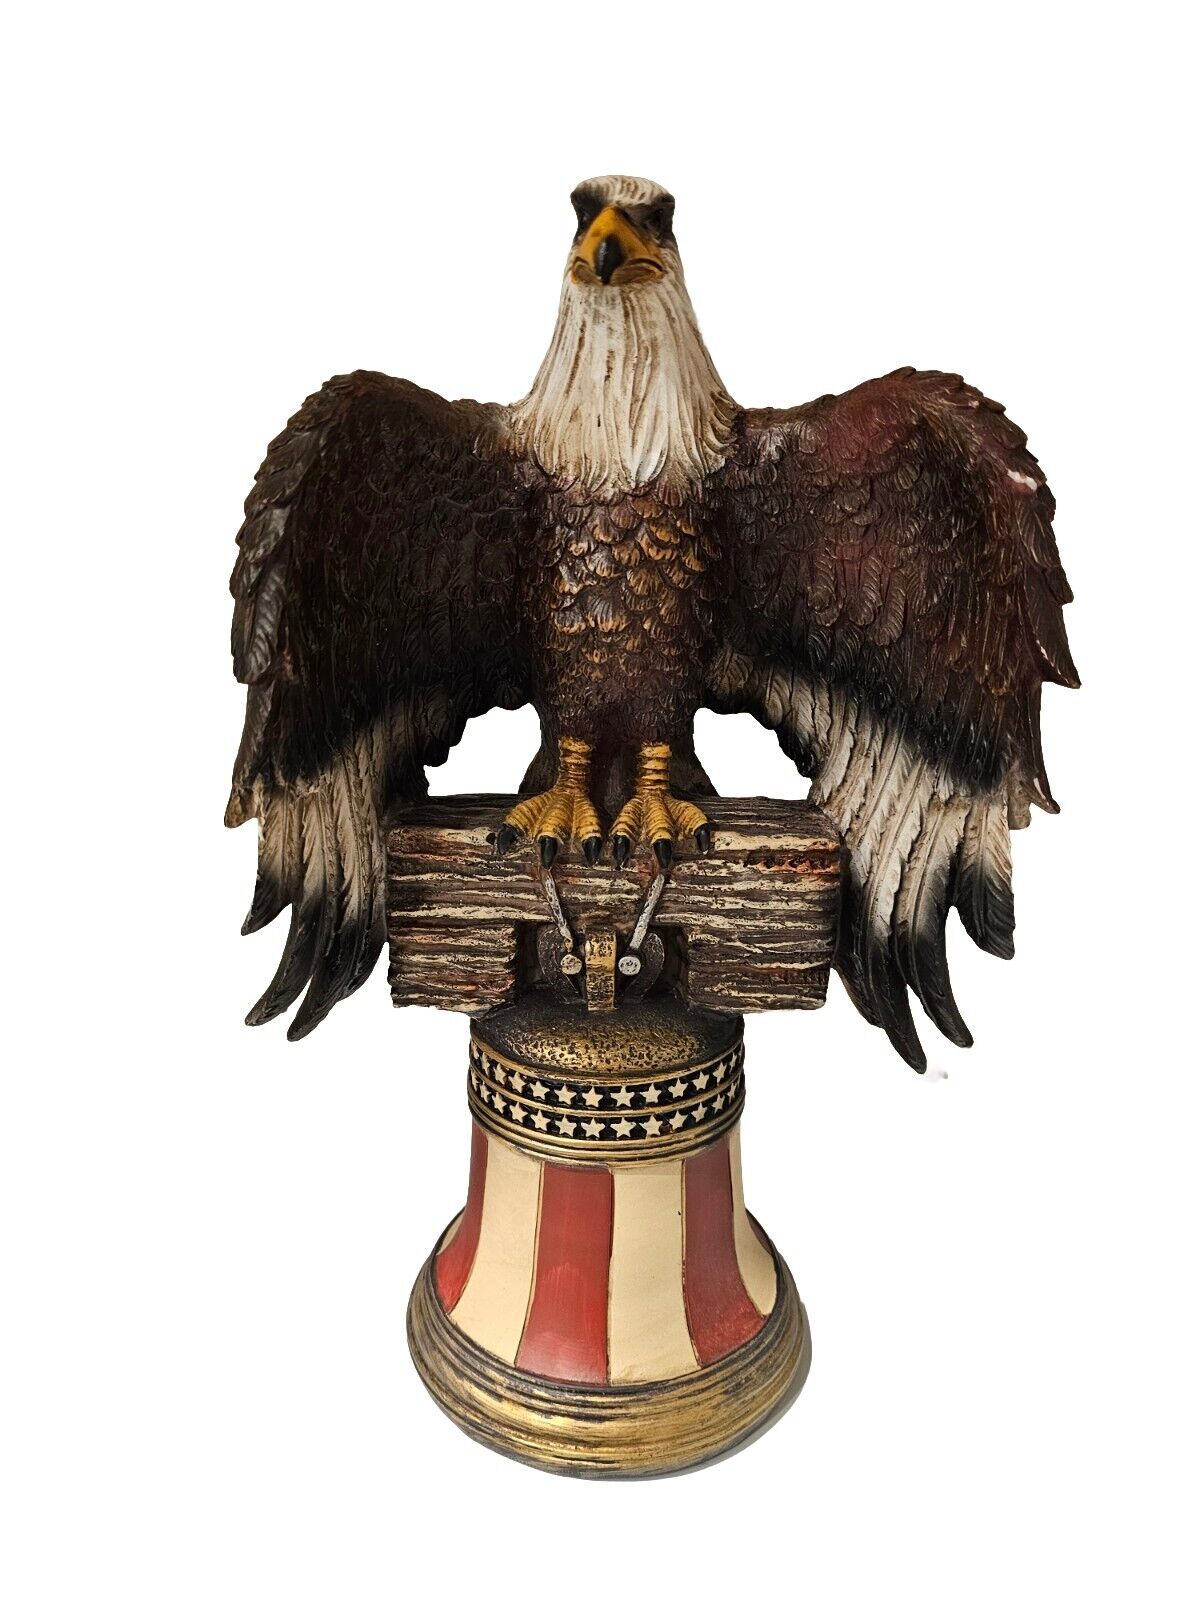 Texas Artist Independence Day Patriotic Statue Bald Eagle Liberty Bell Figurine